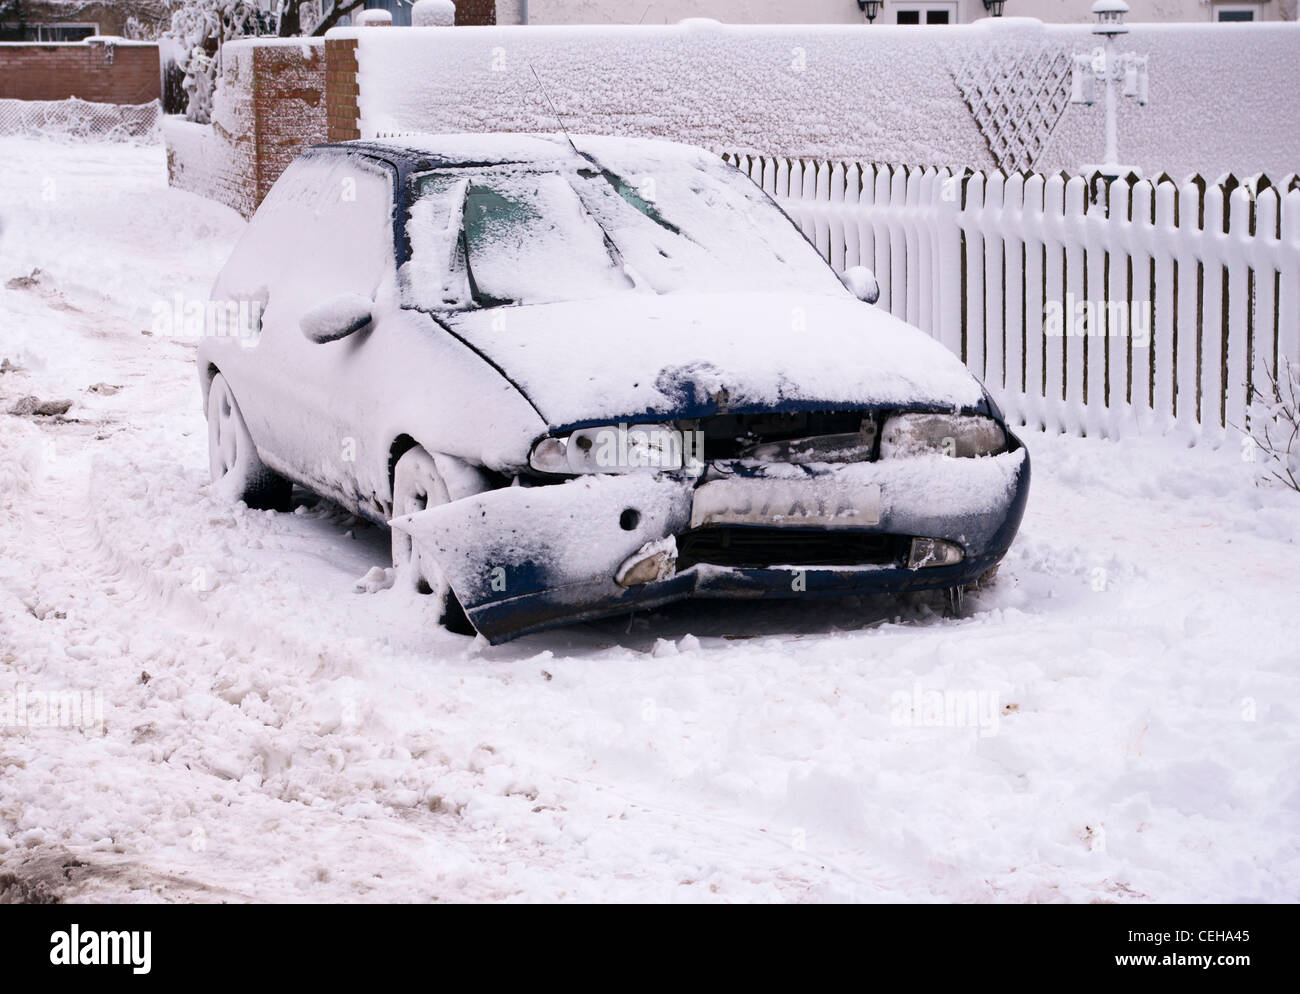 Damaged Dented Broken Down Car Vehicle After an Accident In The Snow Winter UK Stock Photo